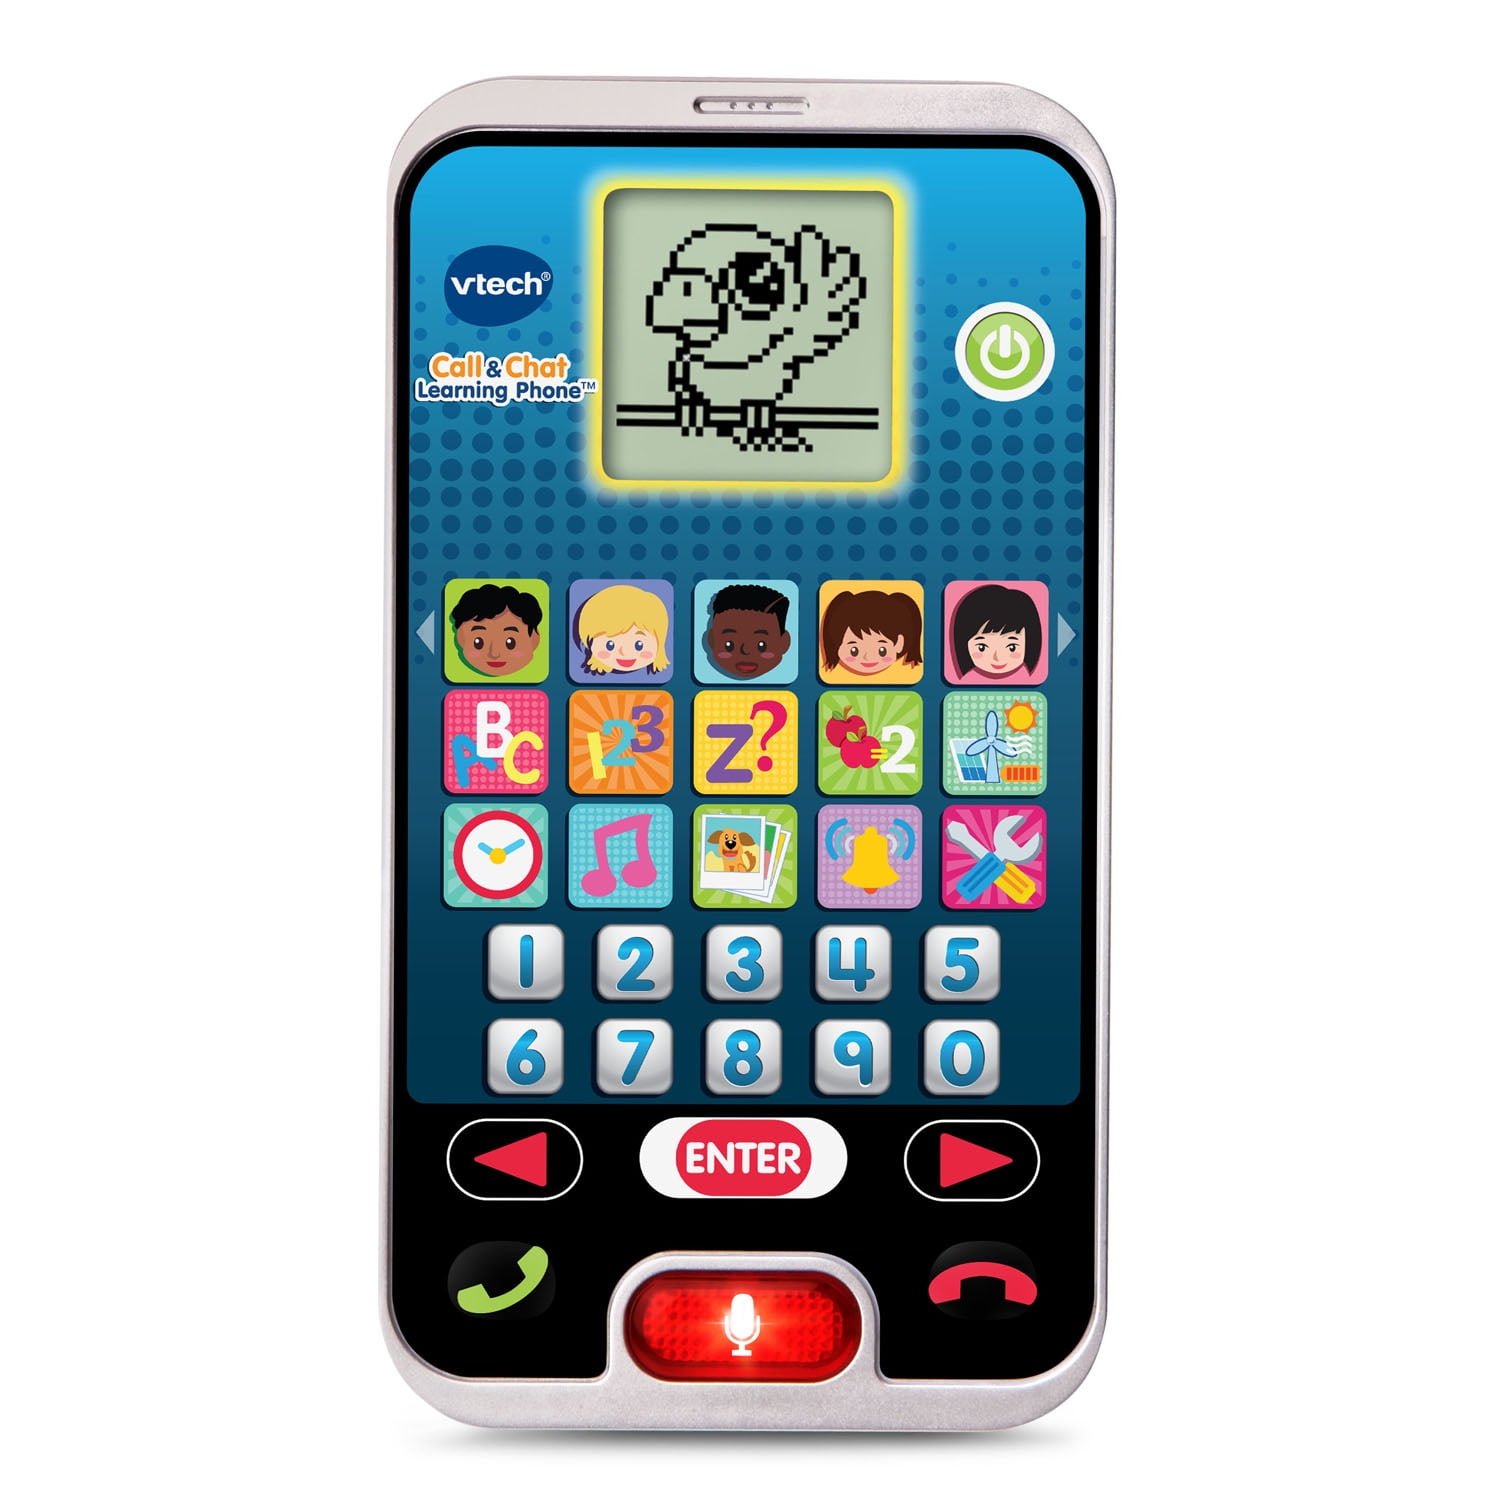 VTech Call and Chat Learning Phone, Pretend Play Toy Phone For Kids